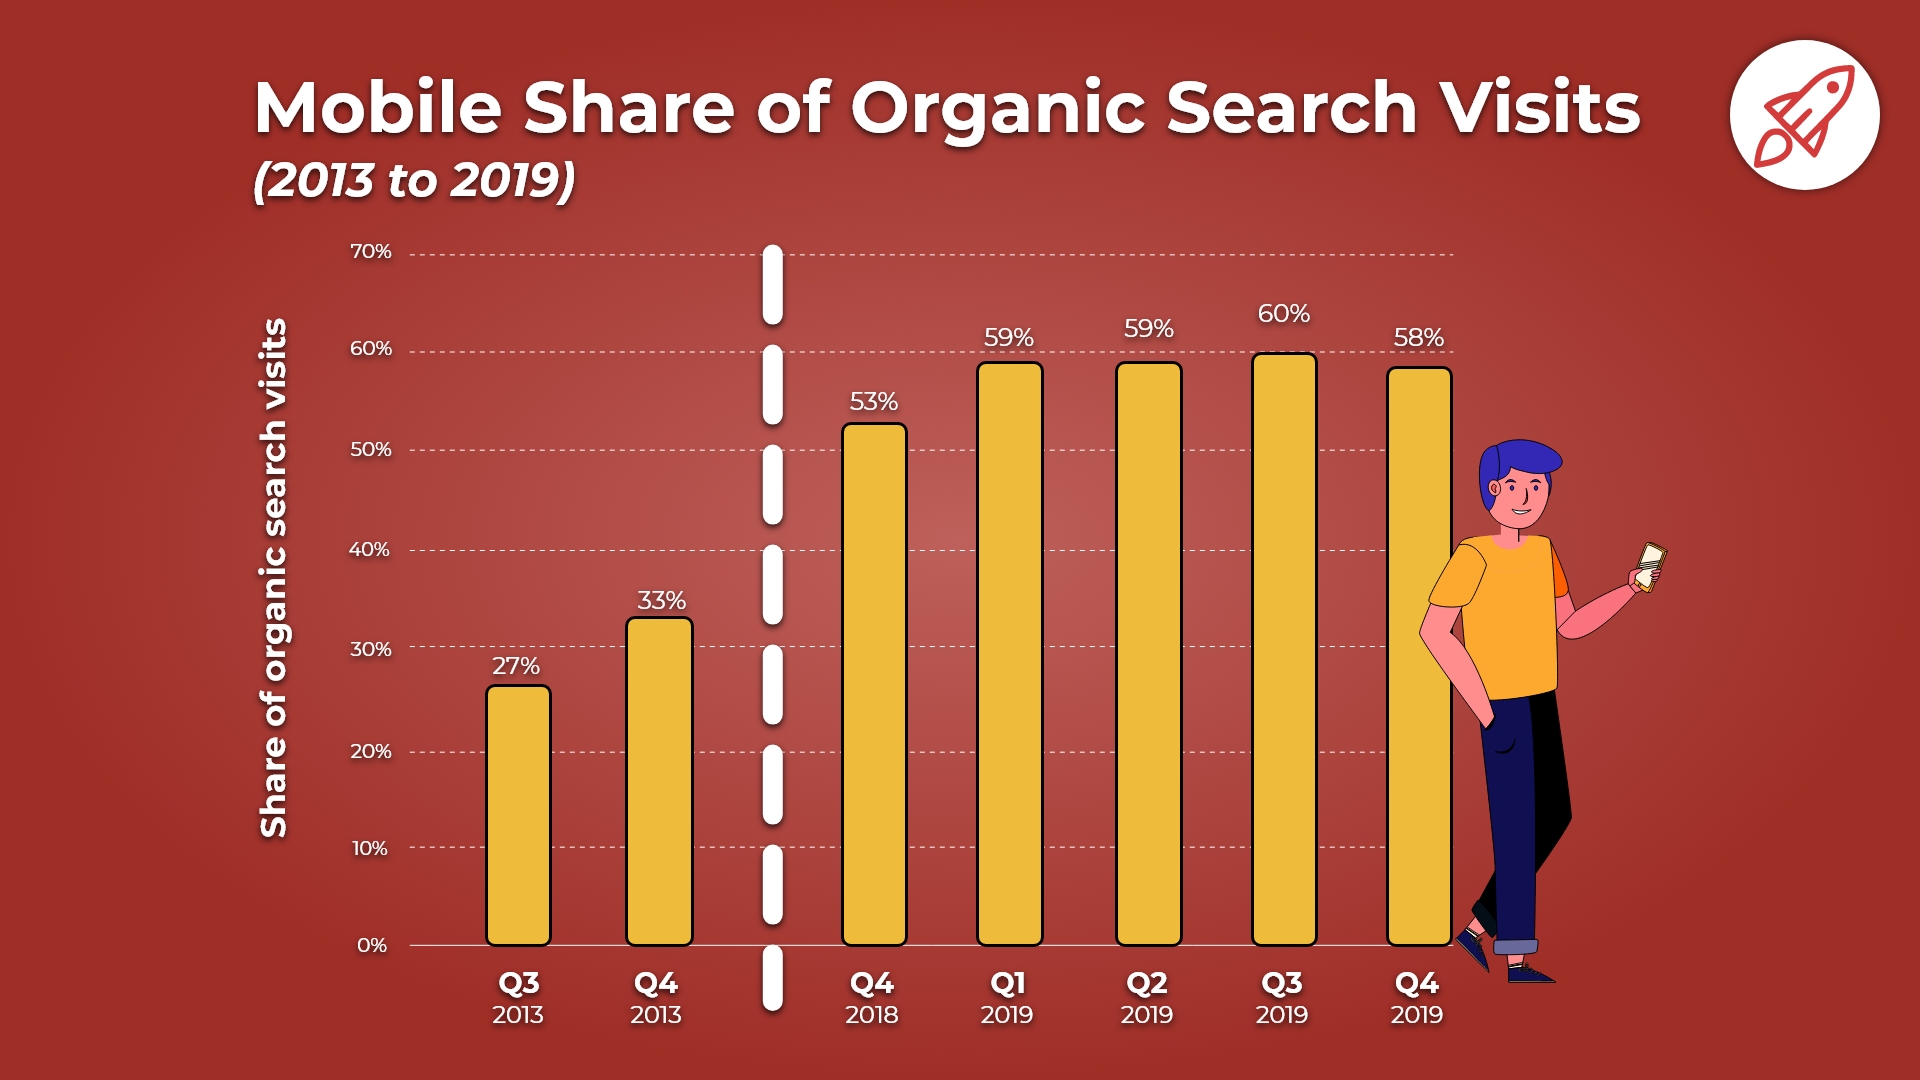 mobile share of organic search visits by BroadbandSearch